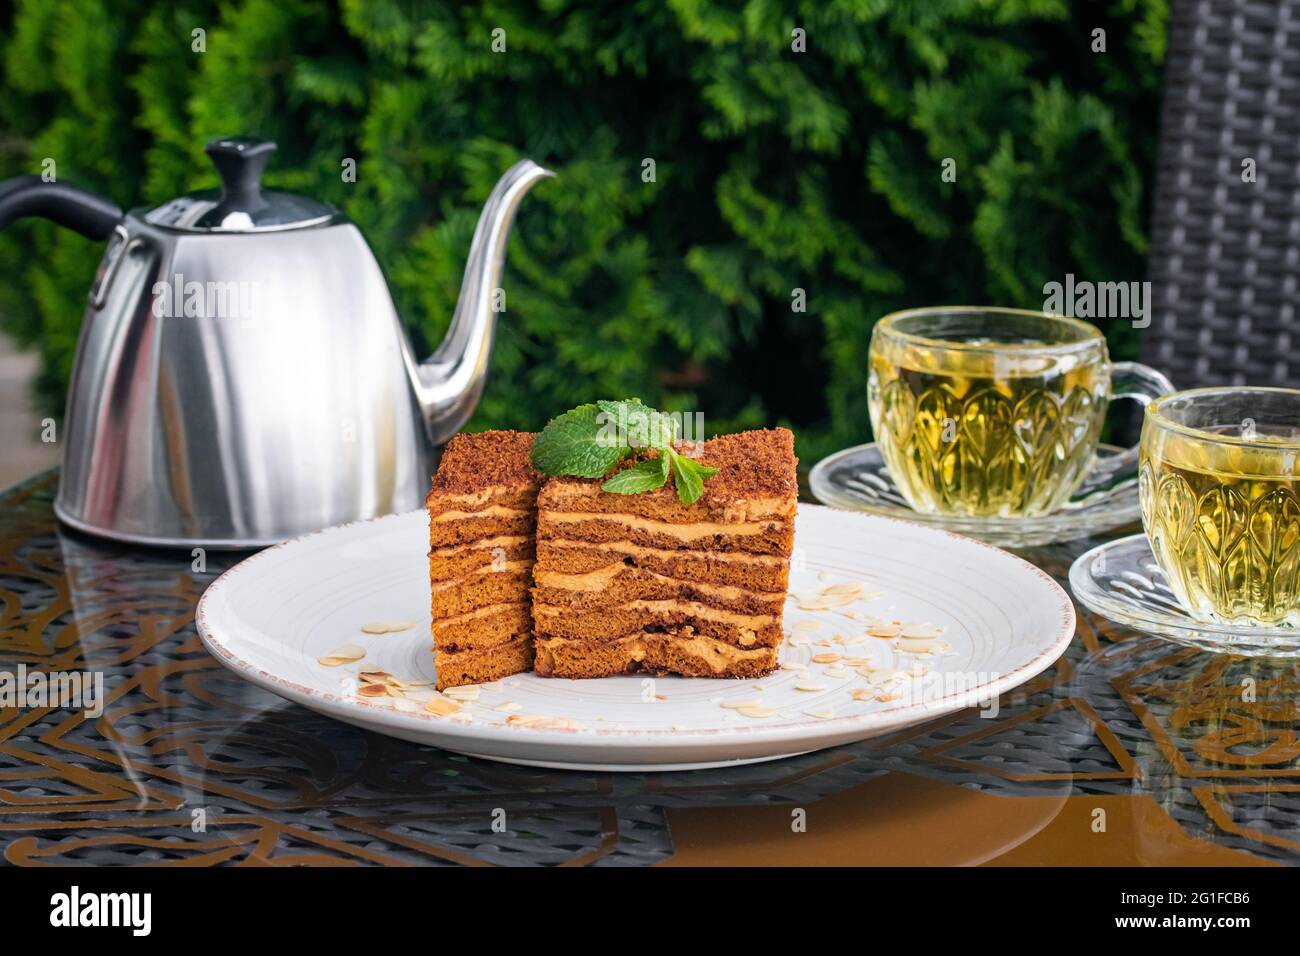 Medovik cake covered with crumbs, two cups with mint tea and steel kettle on table in summer cafe. Tea drinking concept, British culture. Still life. Stock Photo